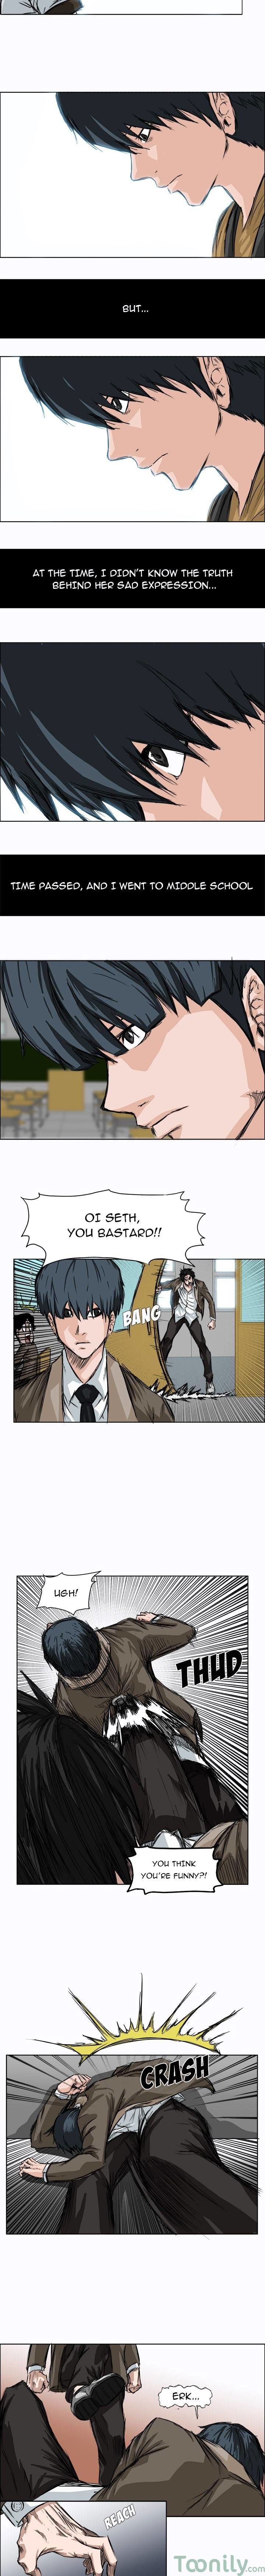 Boss in School Chapter 3 page 6